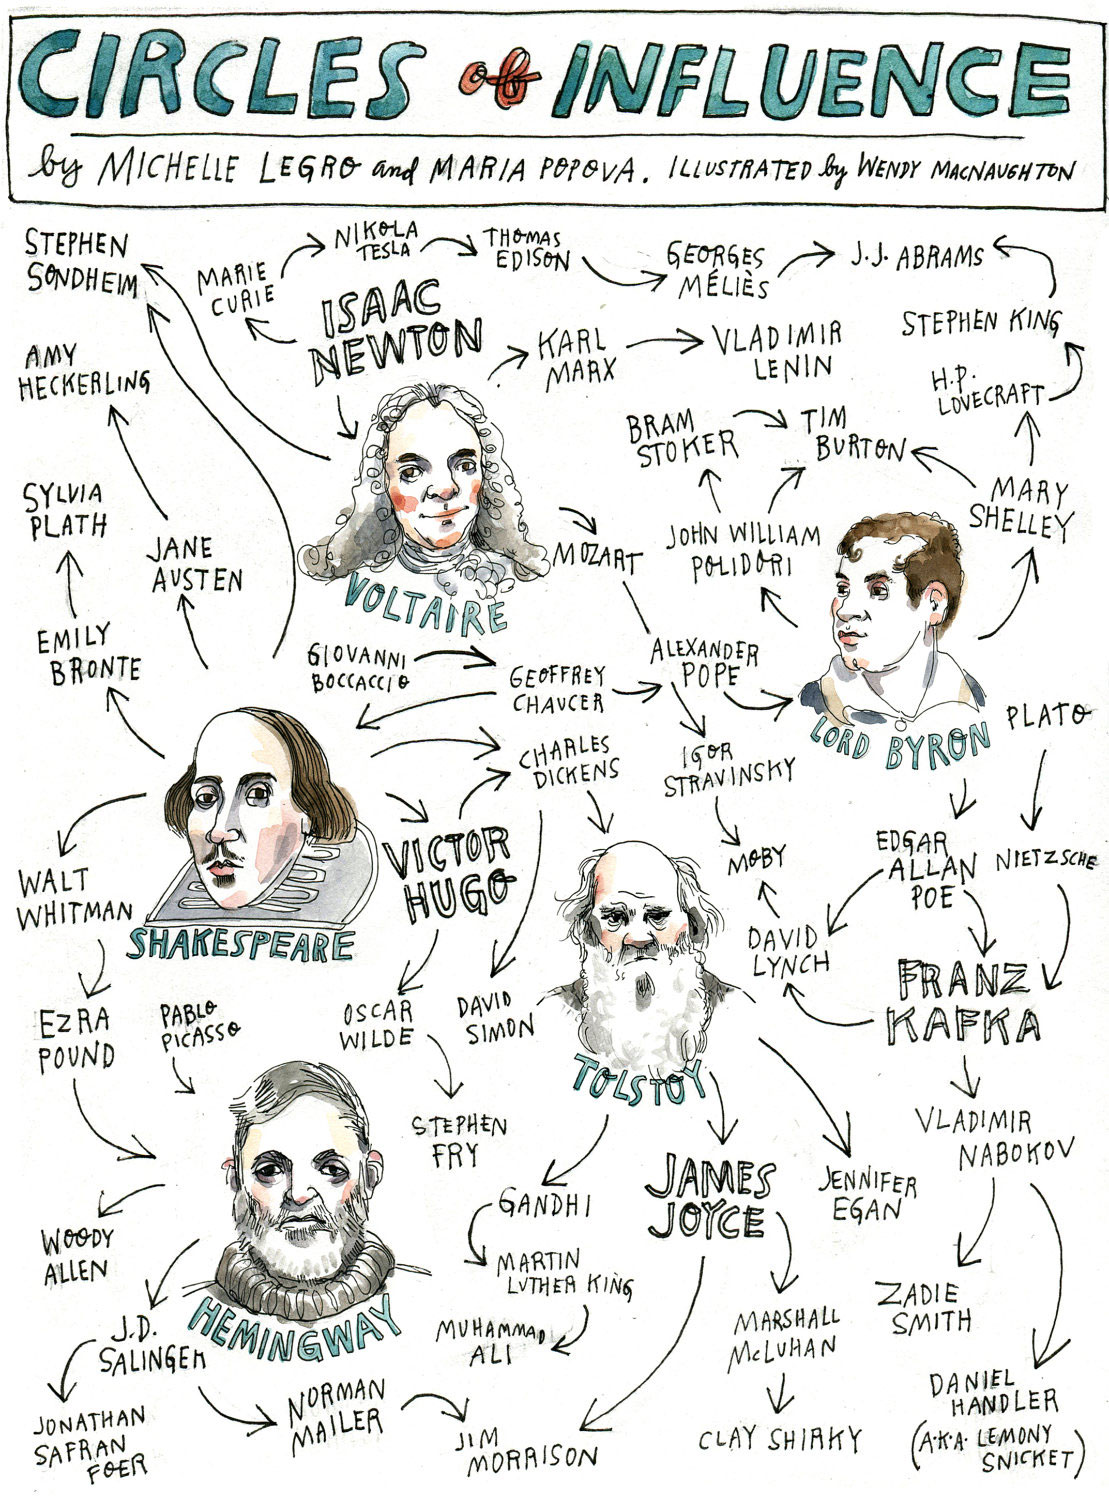 How Creative People In History Have Inspired Each Other [Chart]